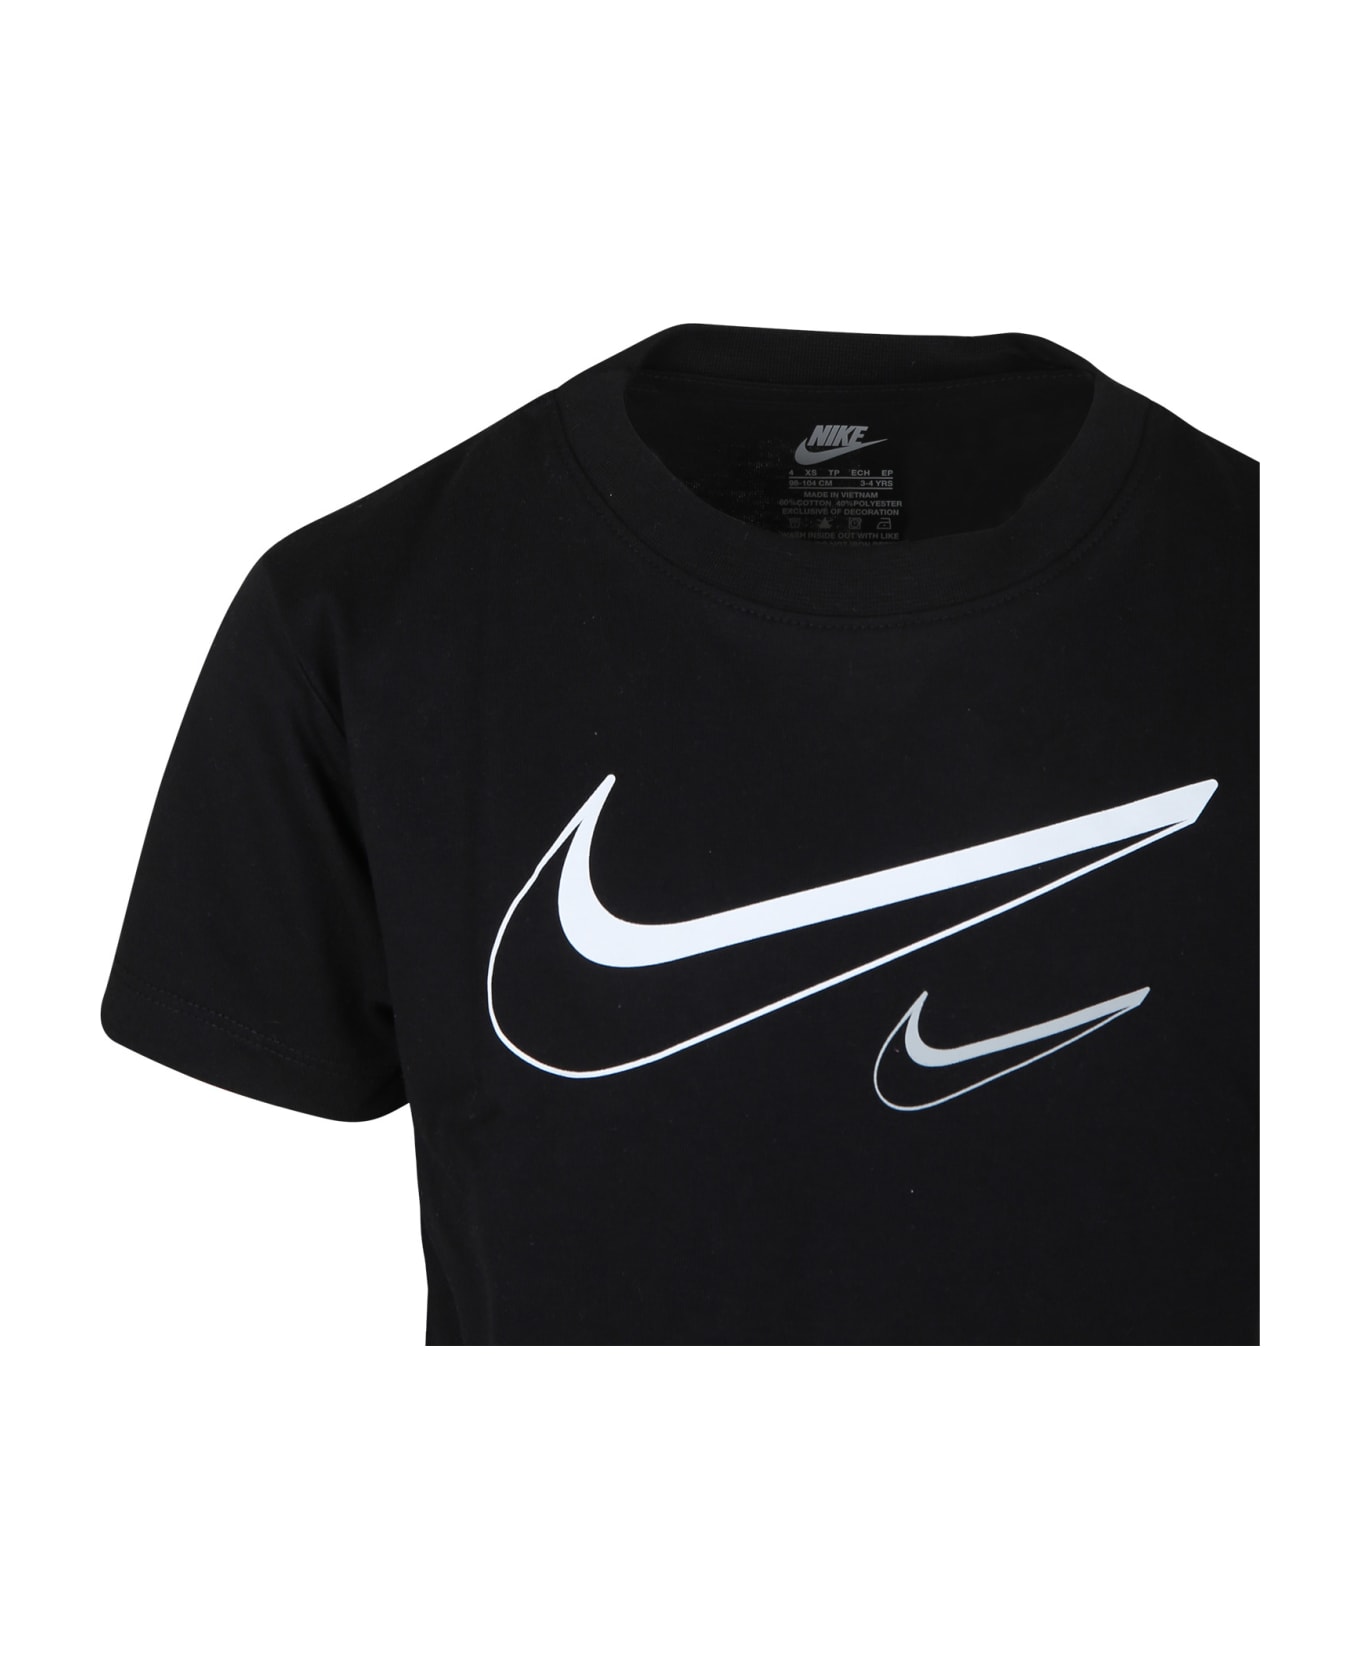 Nike Black T-shirt For Girl With Swoosh - Black